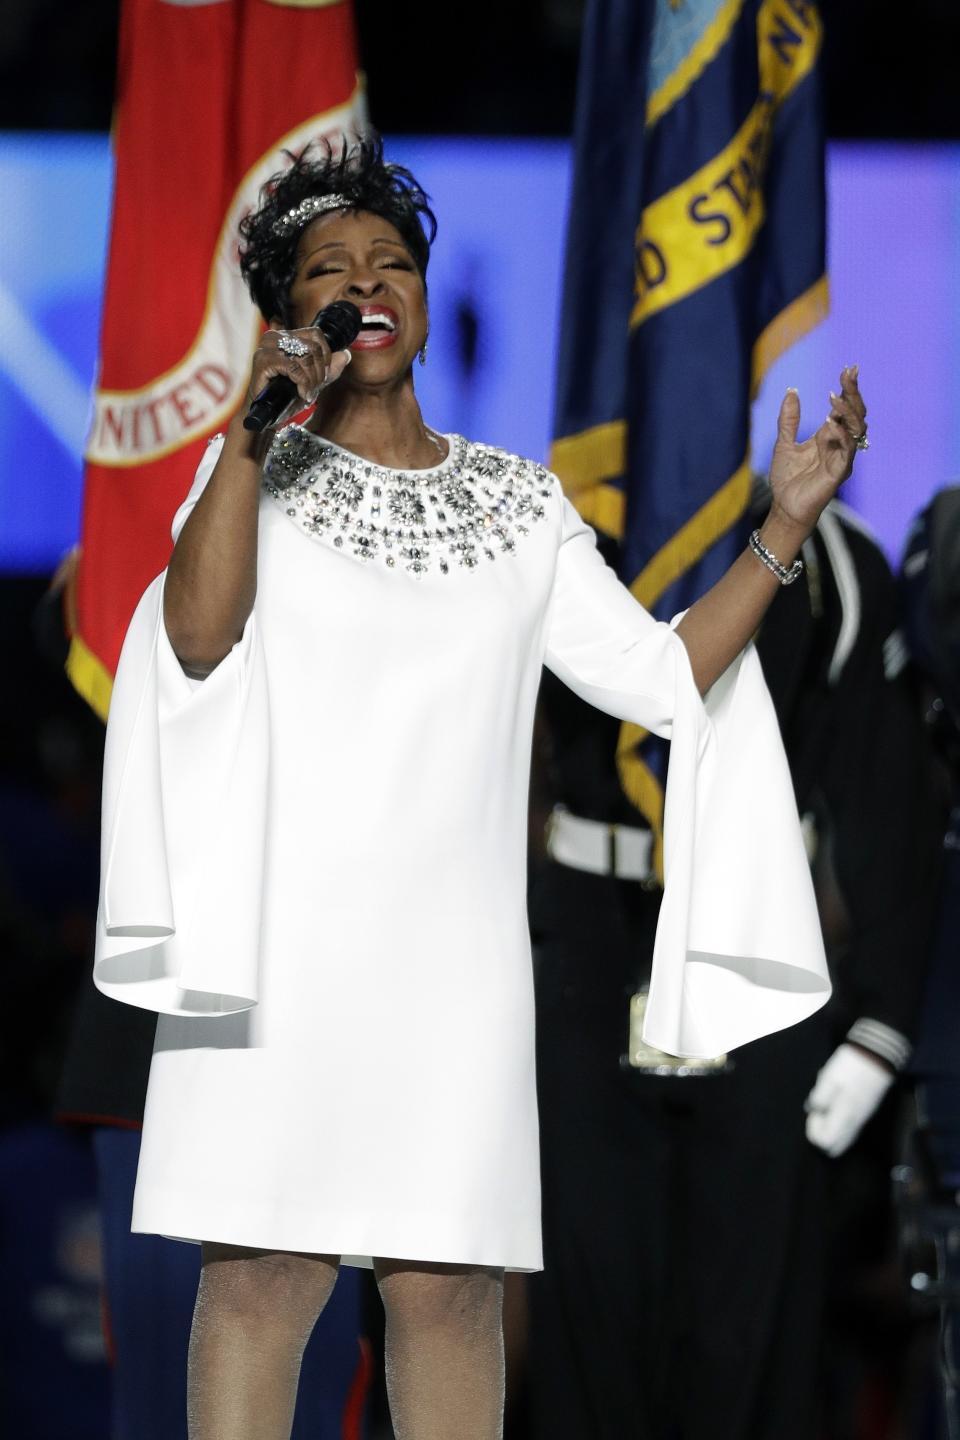 Gladys Knight singing the national anthem at Super Bowl LIII between the New England Patriots and the Los Angeles Rams in Atlanta on Sunday. (Photo: Associated Press)